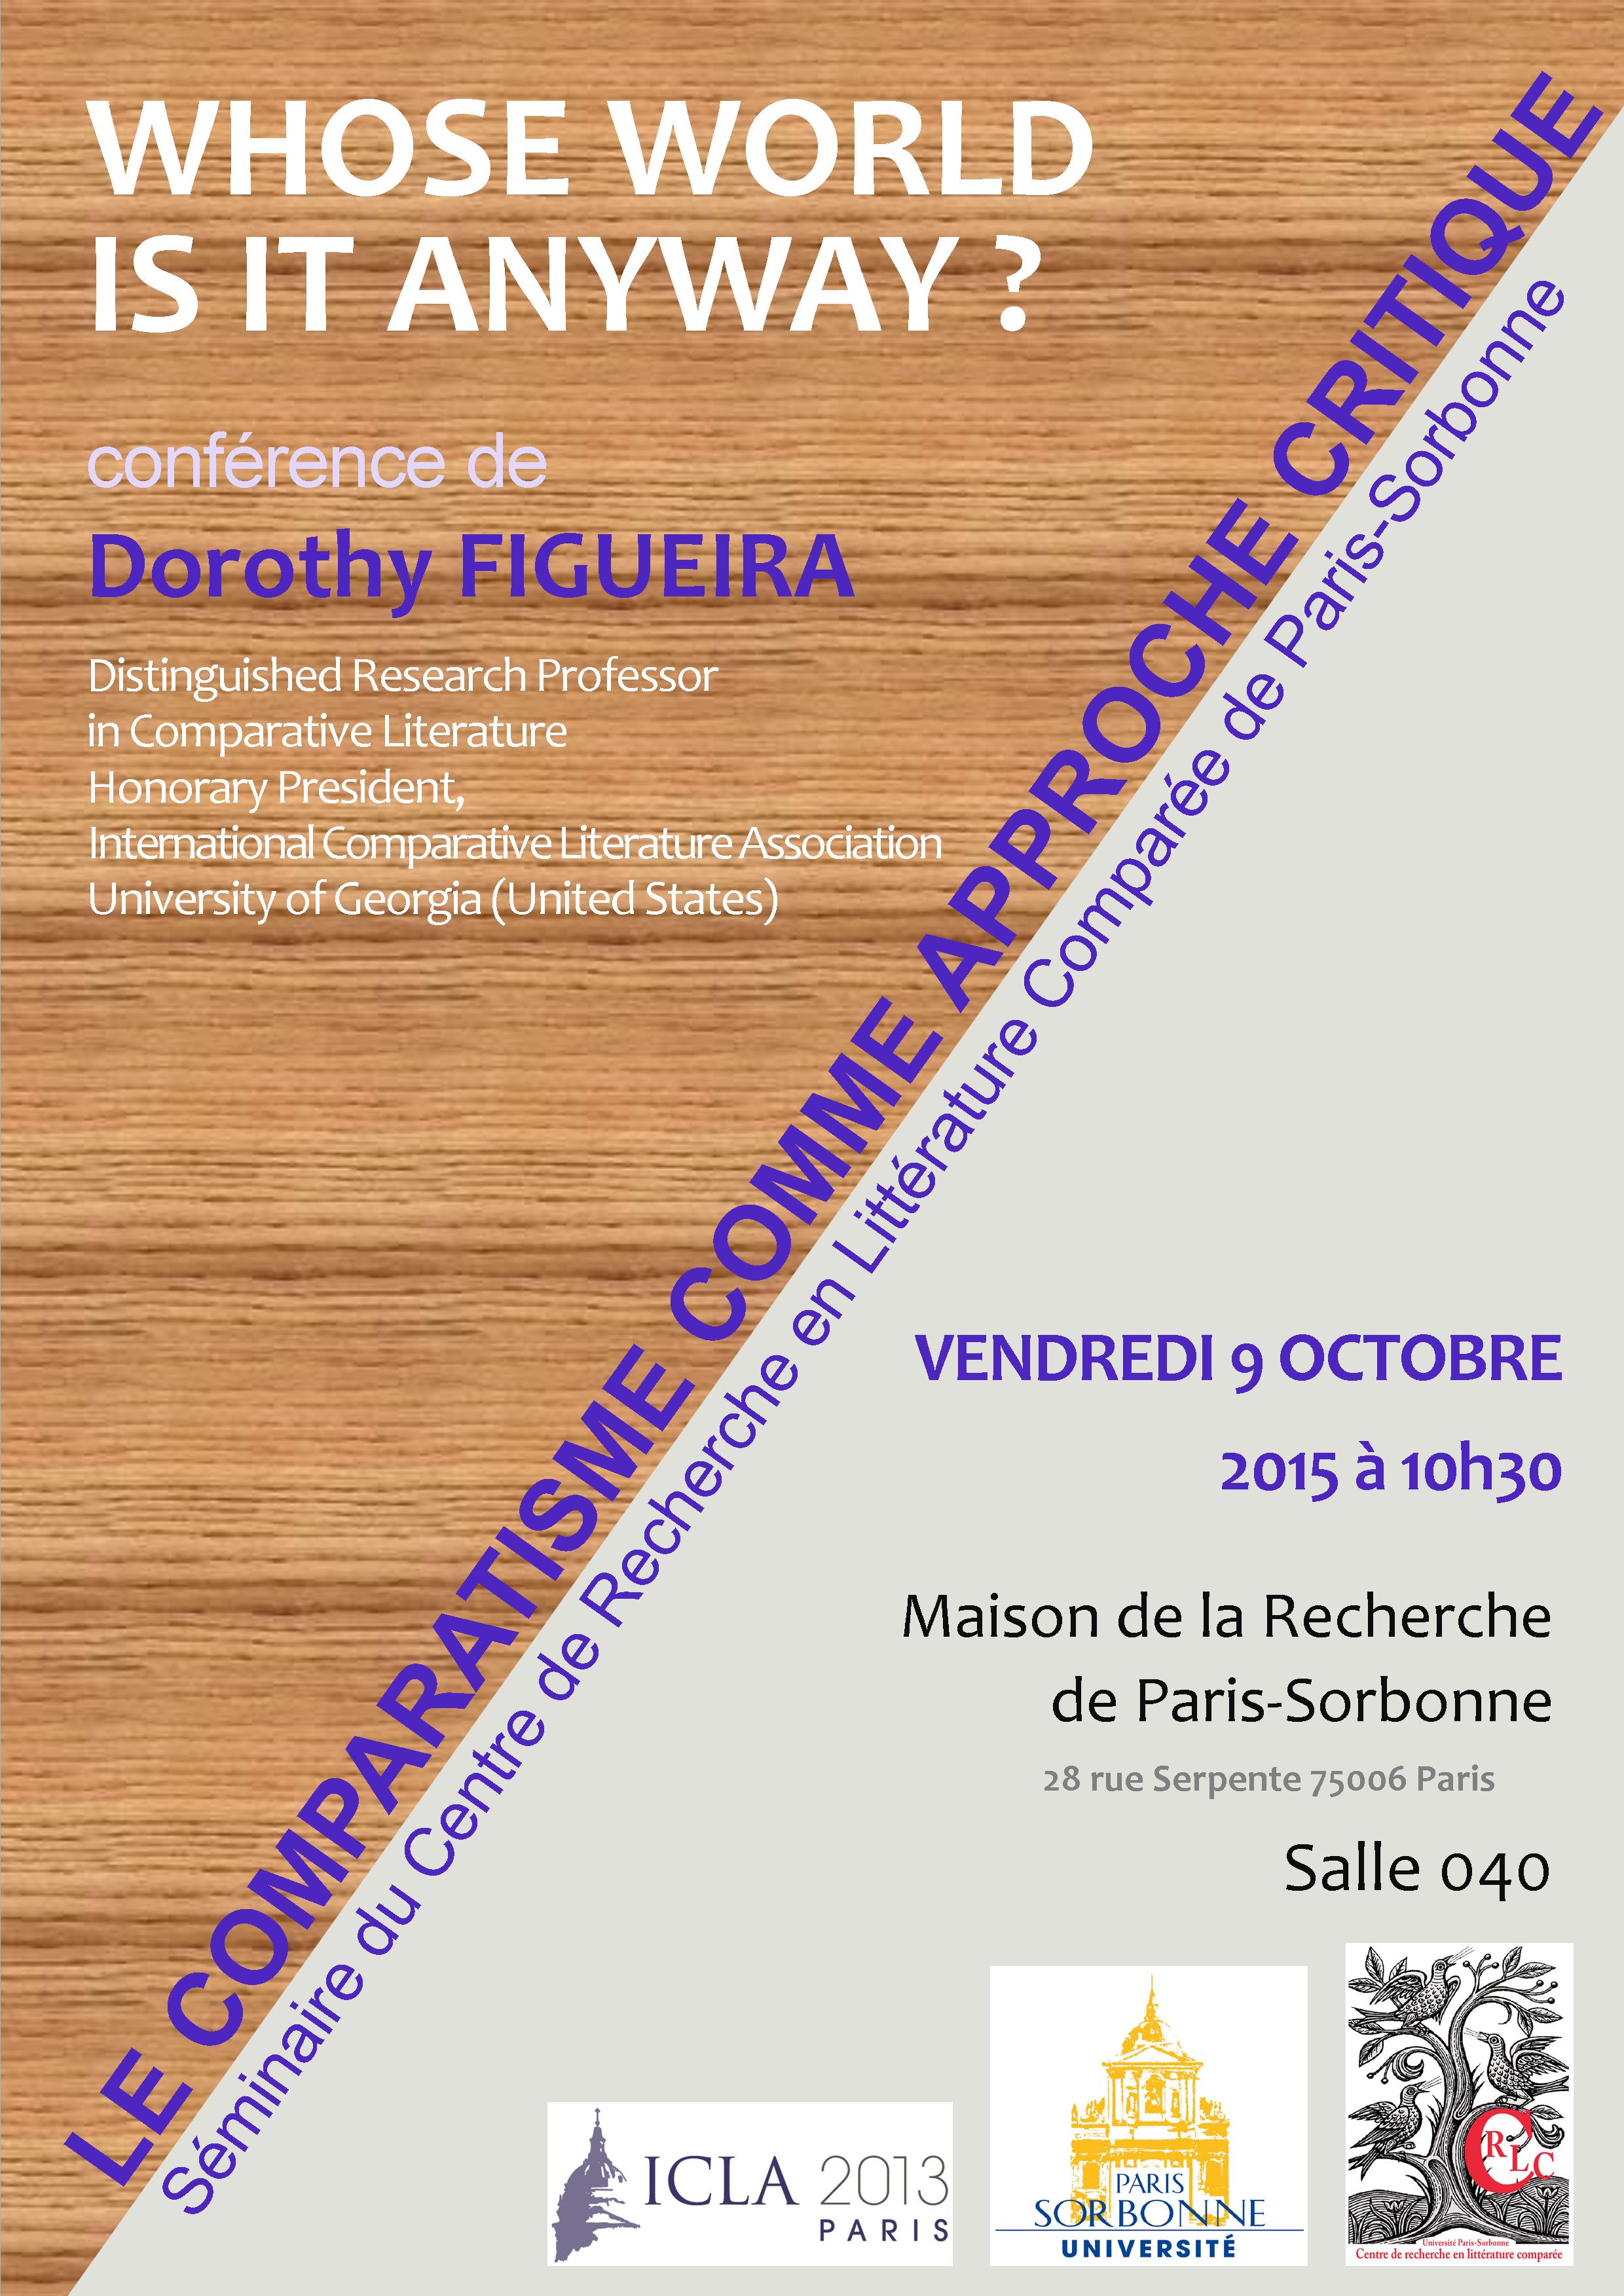 WHOSE WORLD IS IT ANYWAY
Conférence de Dorothy FIGUEIRA